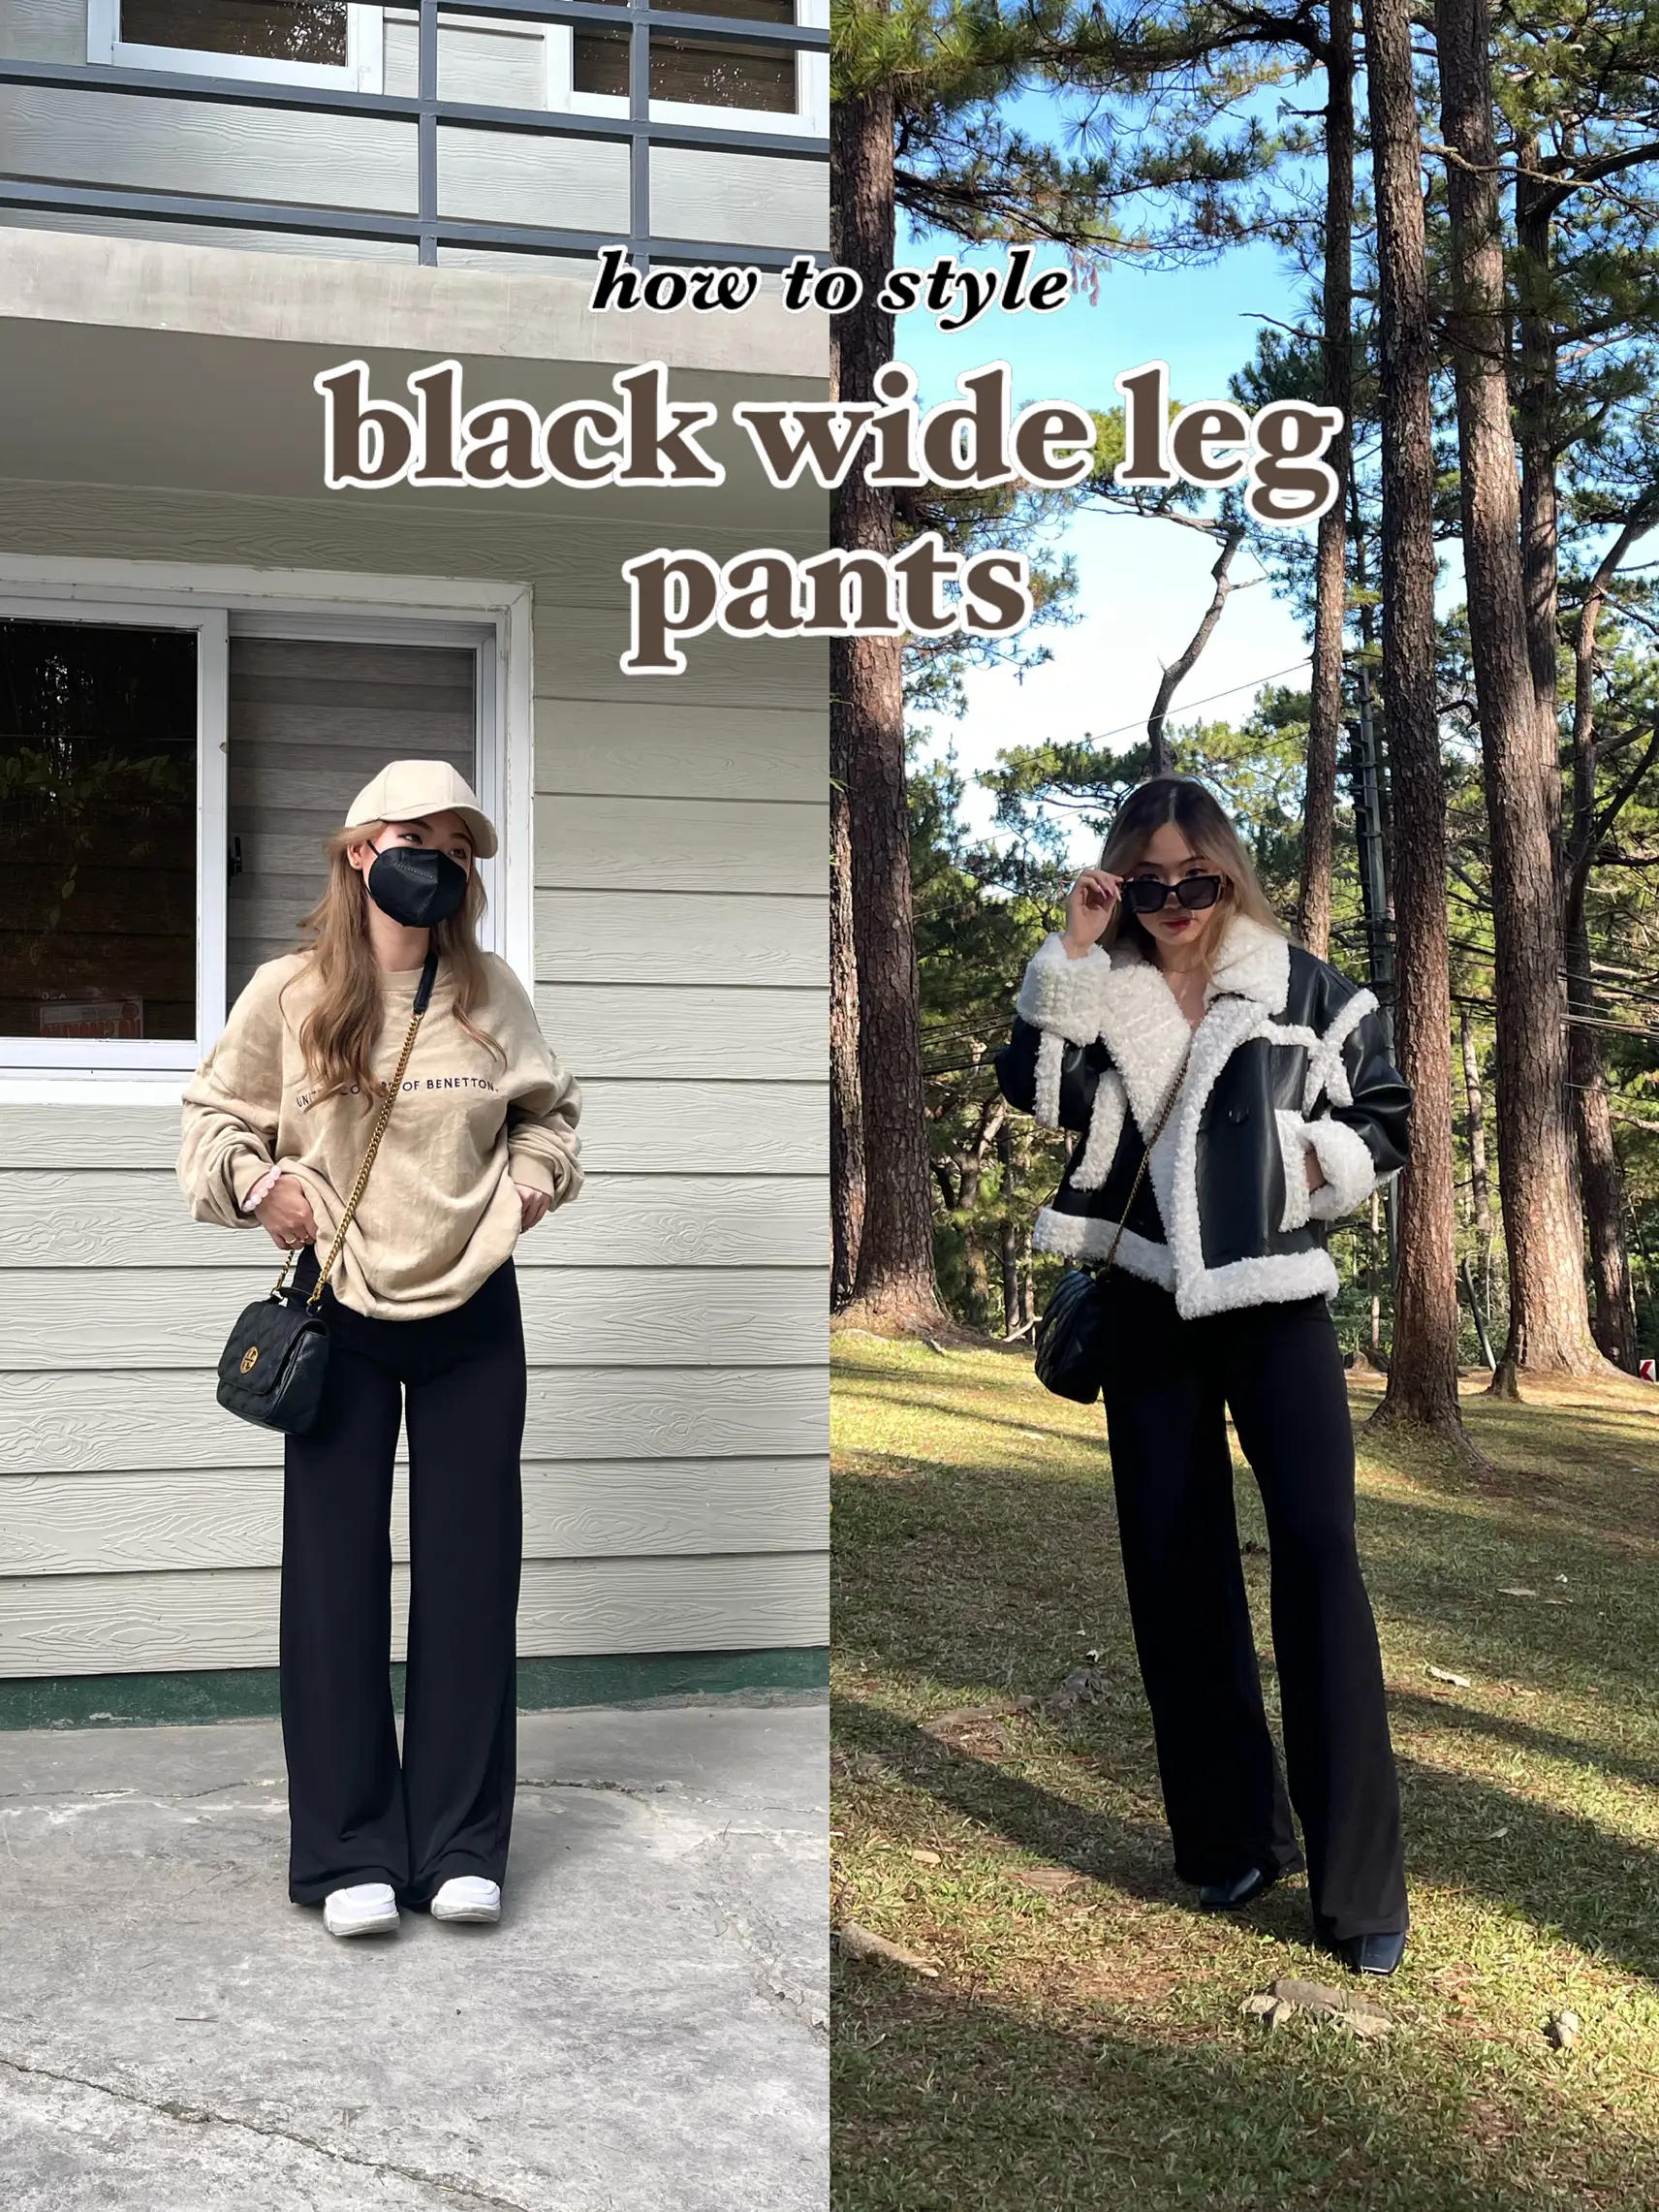 Styling Black Pants for Baguio, Gallery posted by Colleen Matti